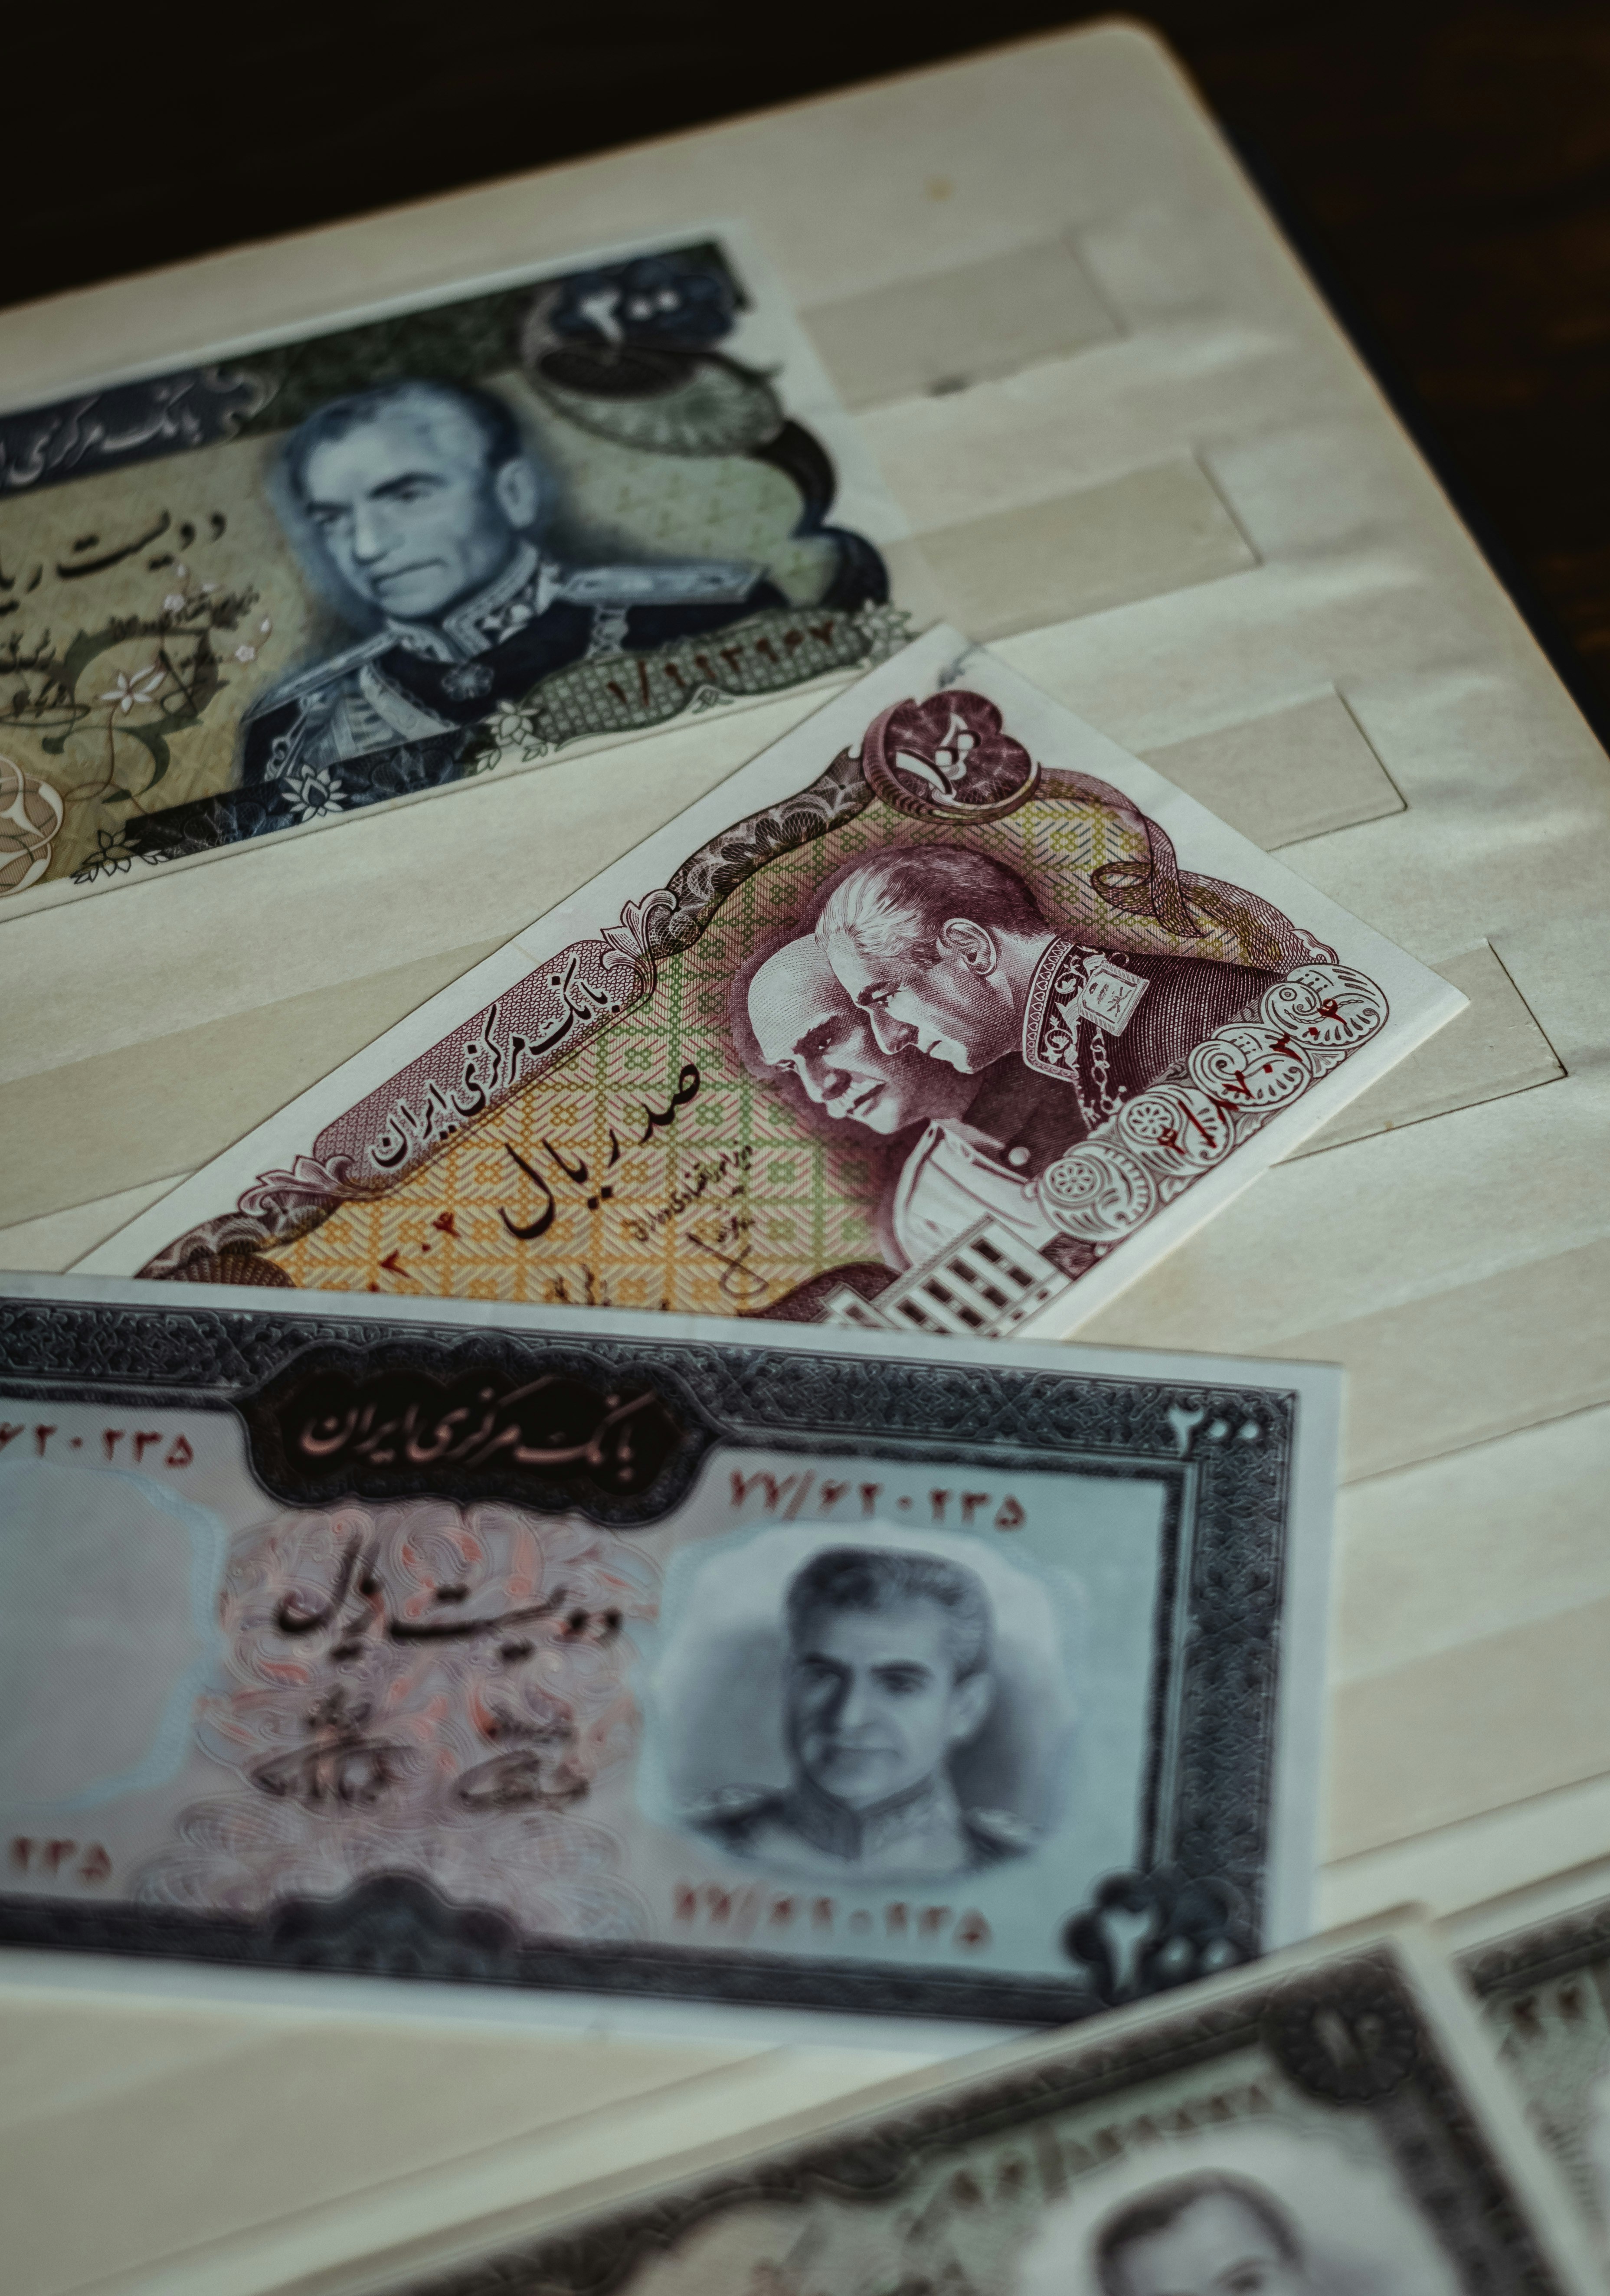 Former bills of Iran's Rial with the pictures of Reza Shah and Mohammad Reza Shah on them. Both the father and the son are pictured in their older ages.